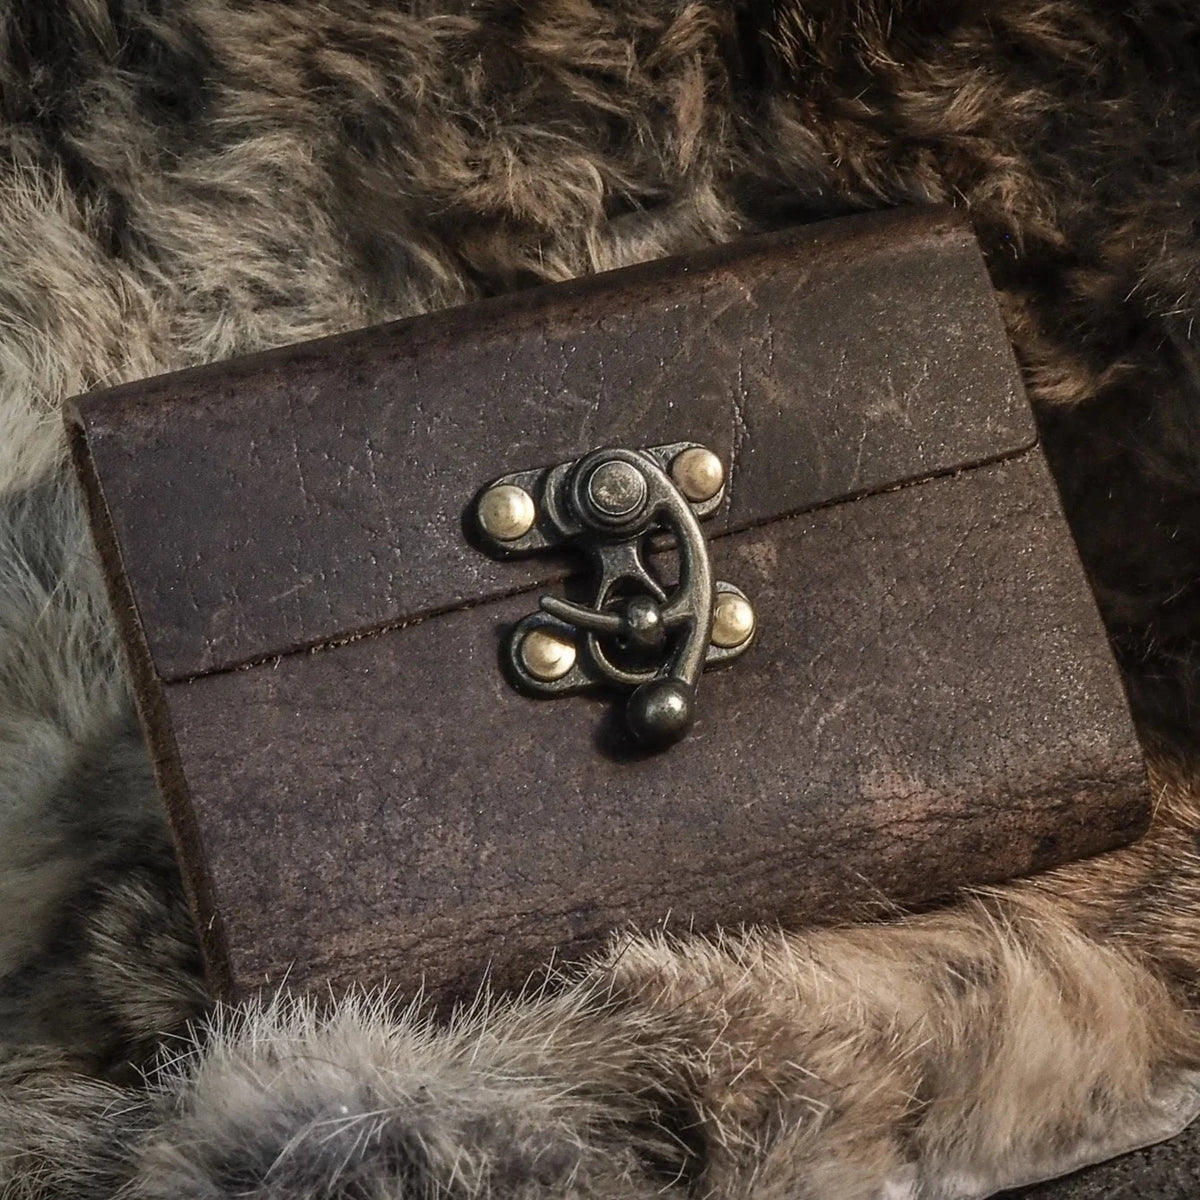 Small leather book with lock